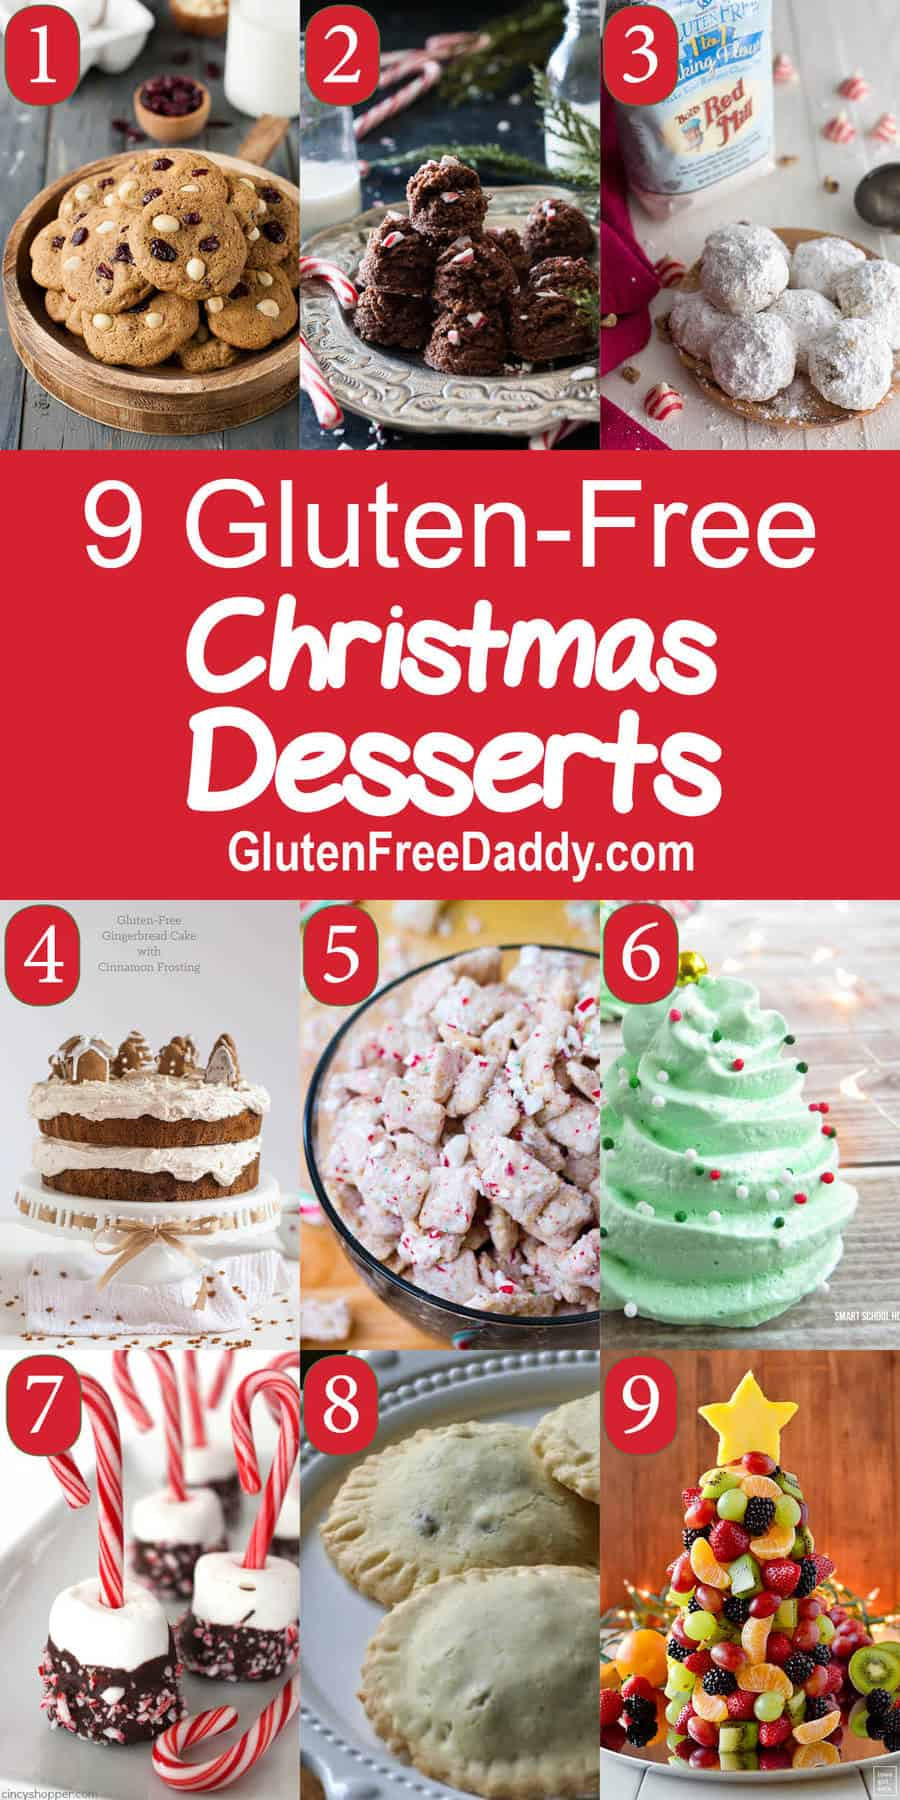 Dairy Free Christmas Desserts
 Gluten Free Christmas Desserts Recipes Without Getting a